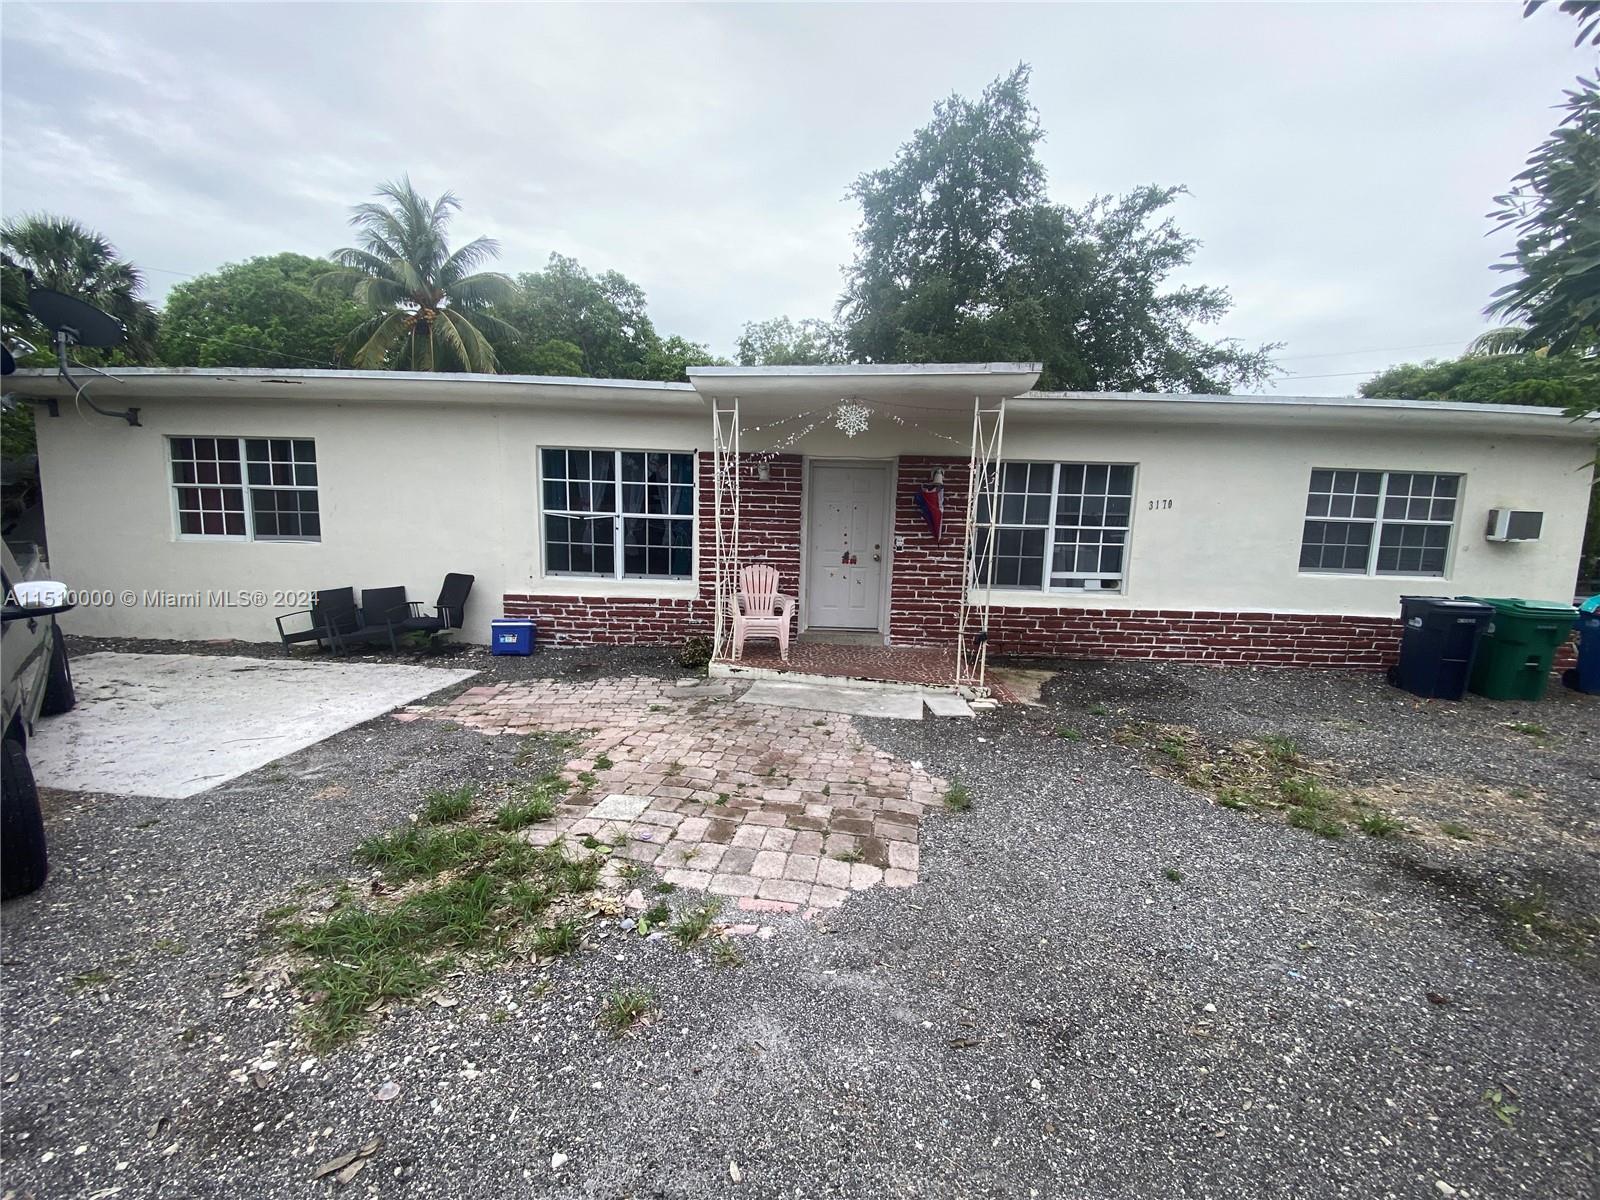 3170 NW 100th St, Miami, Florida 33147, 4 Bedrooms Bedrooms, ,3 BathroomsBathrooms,Residential,For Sale,3170 NW 100th St,A11510000